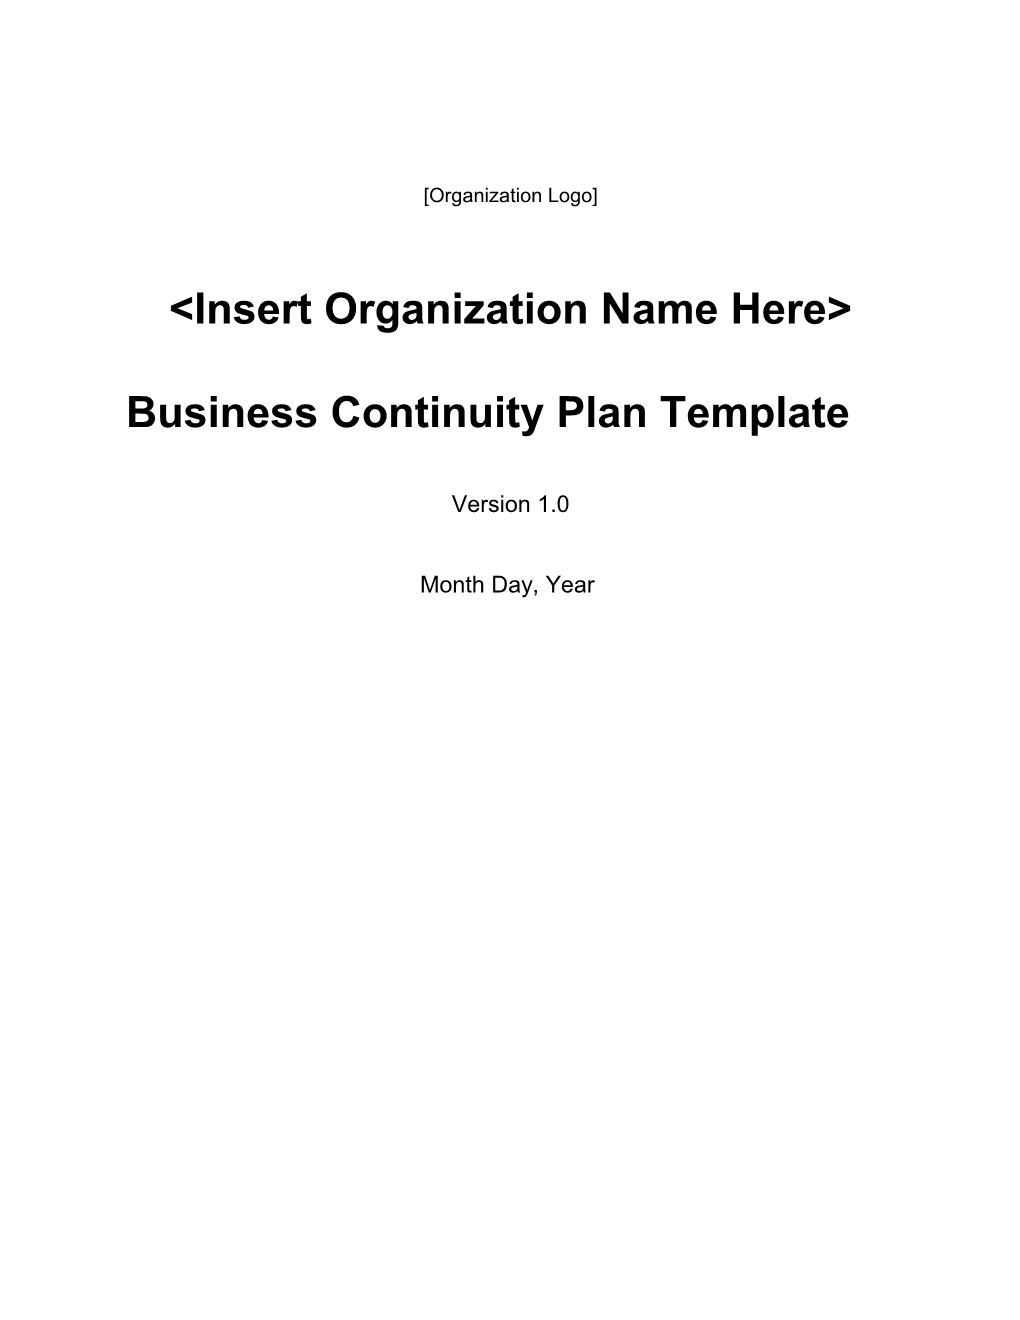 Business Continuity Template Ver. 1.0